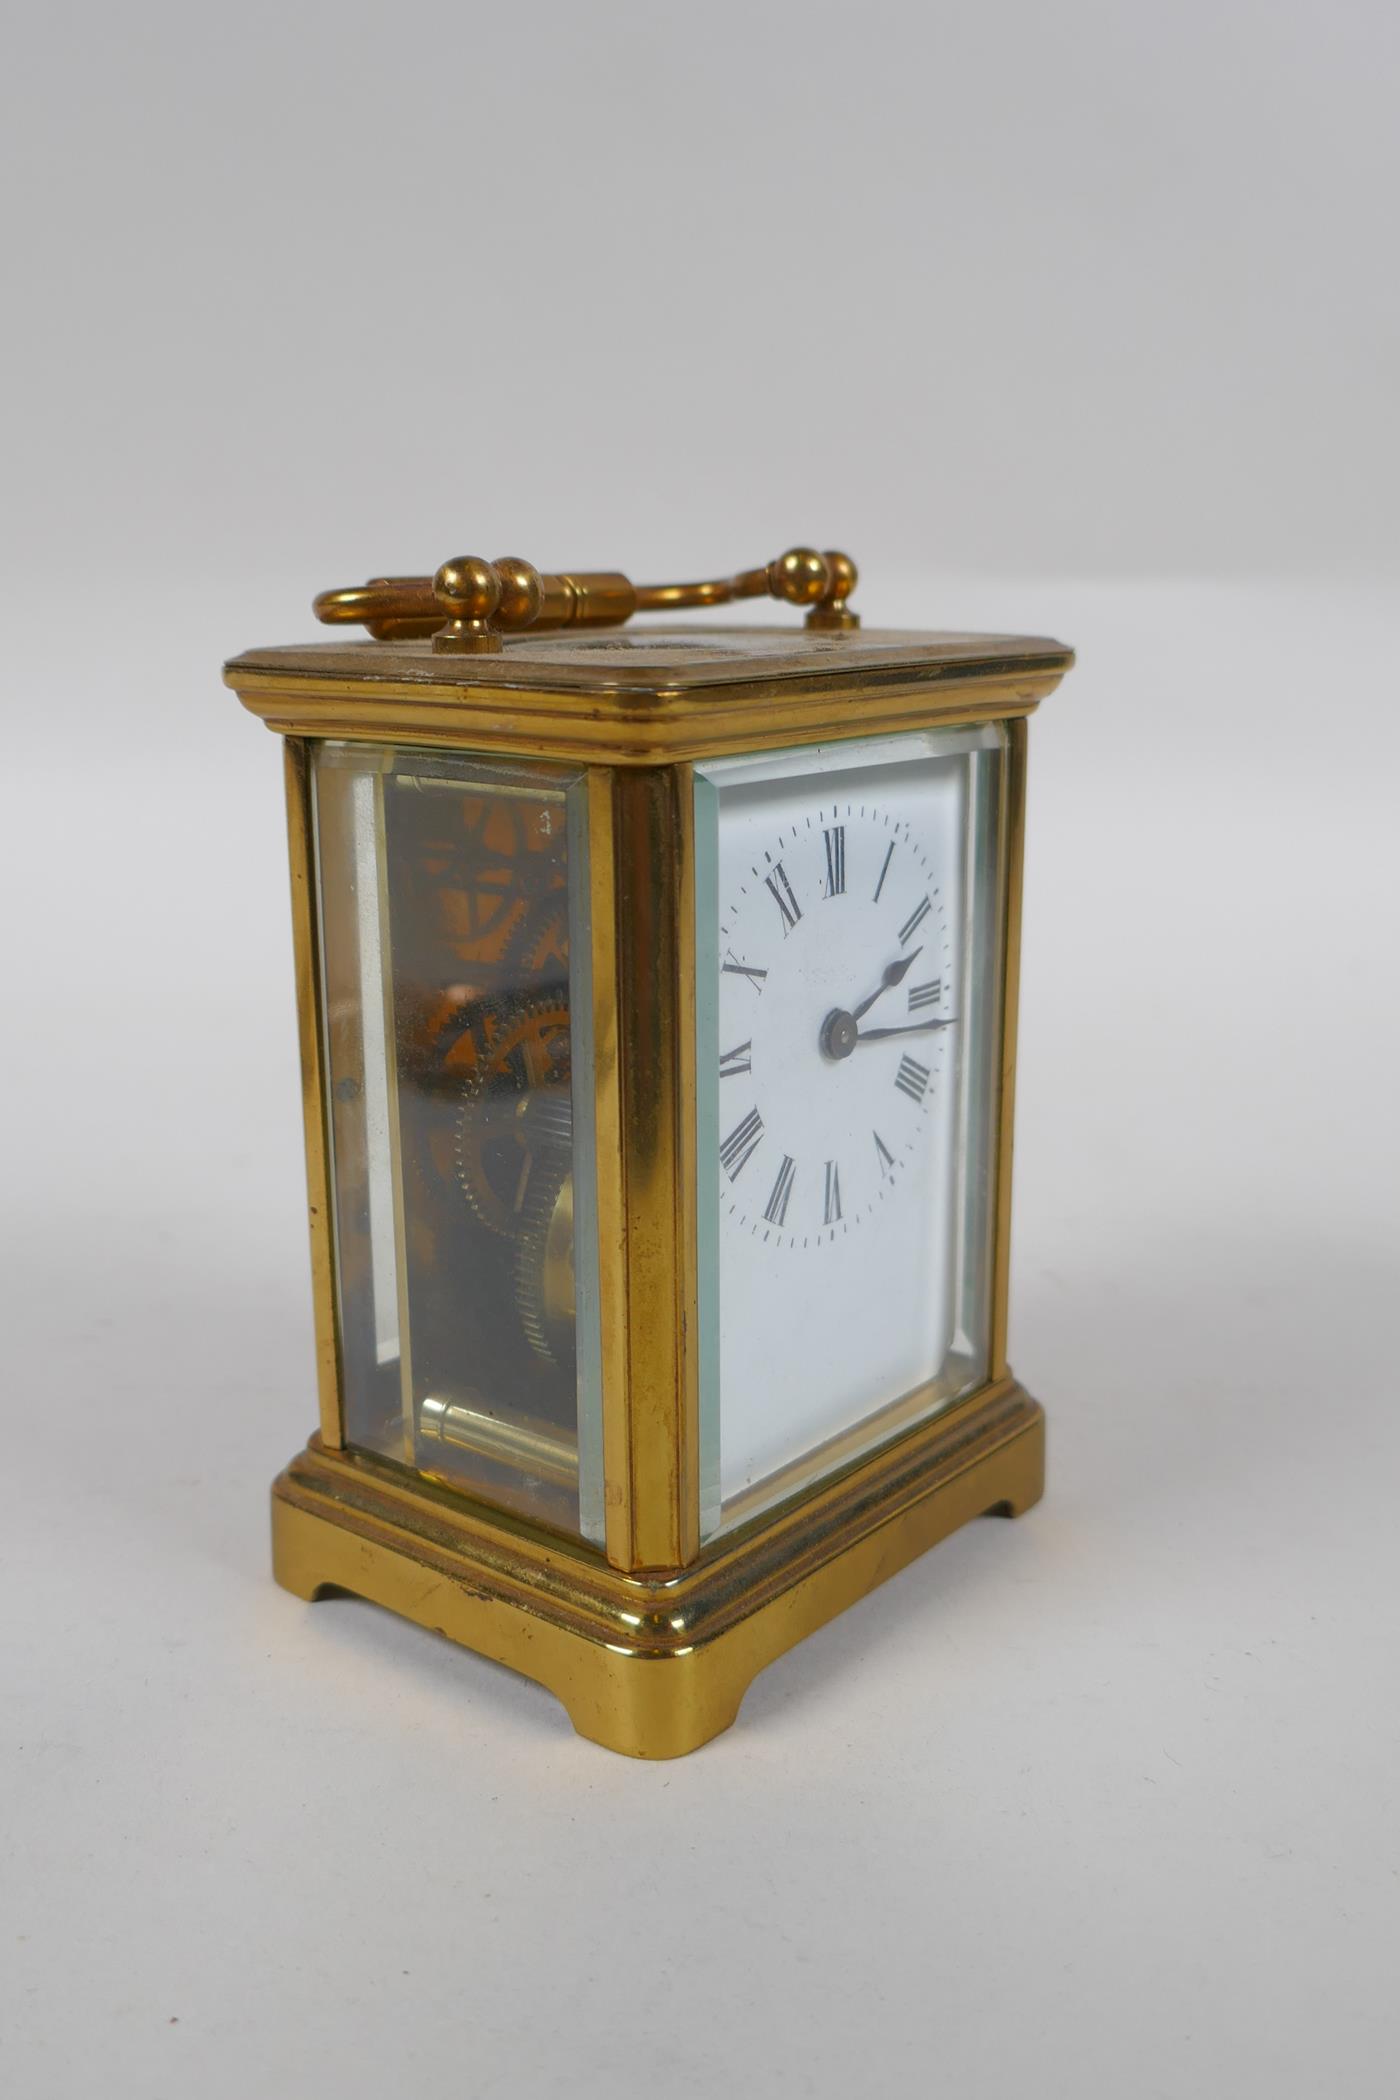 A brass cased carriage clock, the enamel dial with Roman numerals, 8 x 6cm, 11cm high - Image 2 of 4